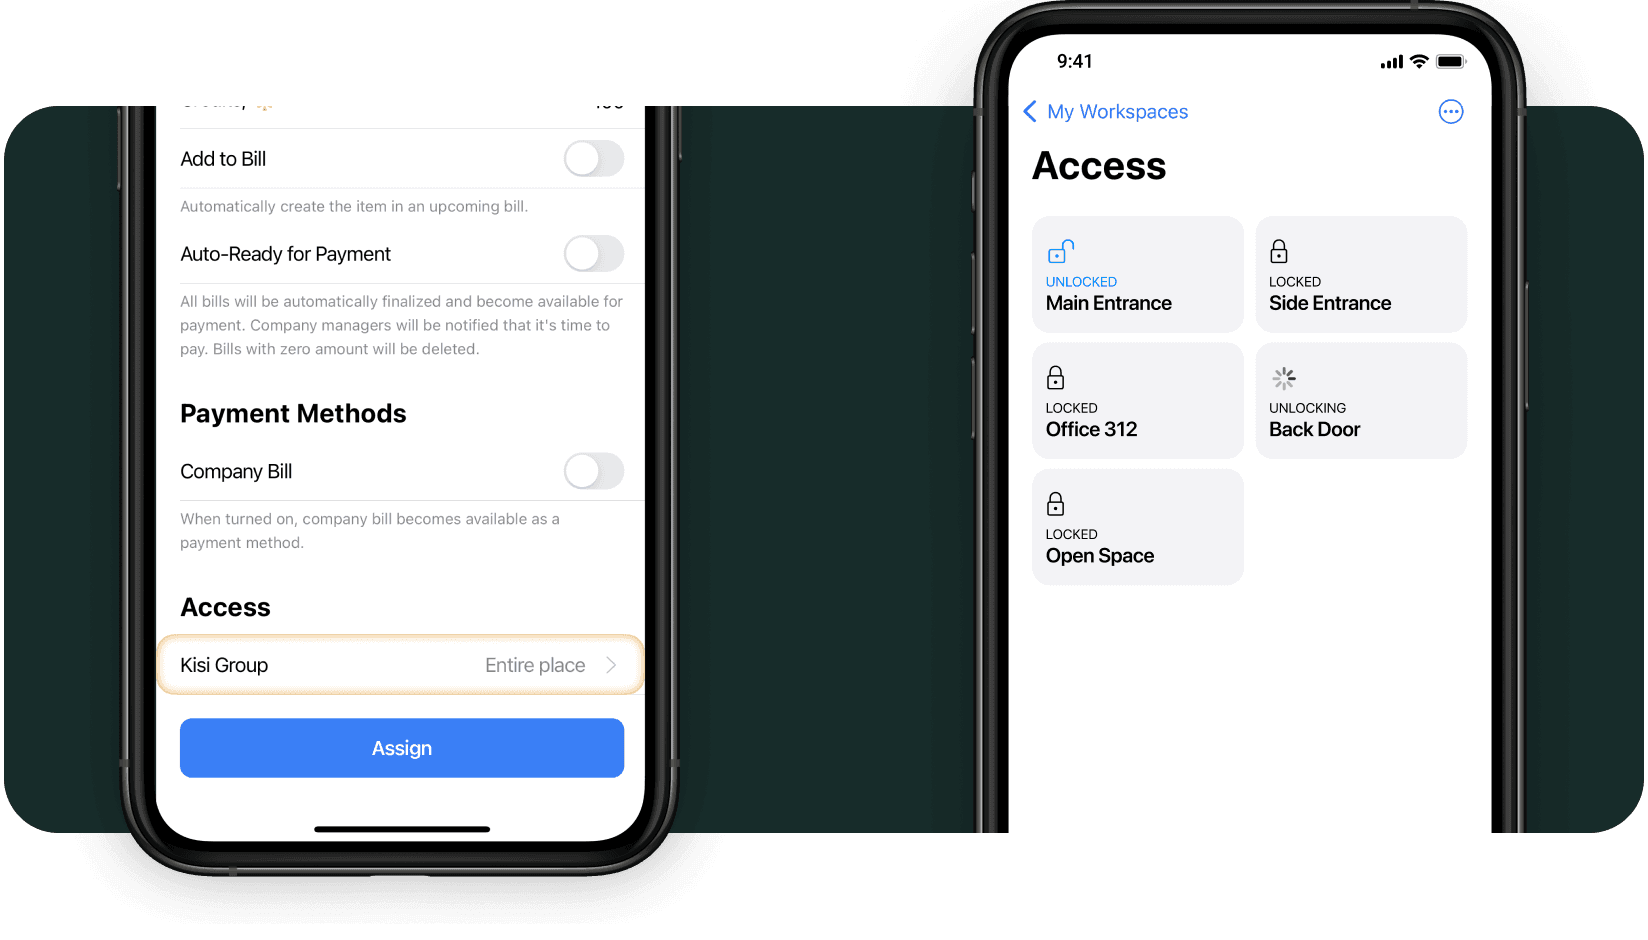 Access control system integrated with Spacebring coworking software enables to grant access according to membership plans and open doors at a workspace with a smartphone